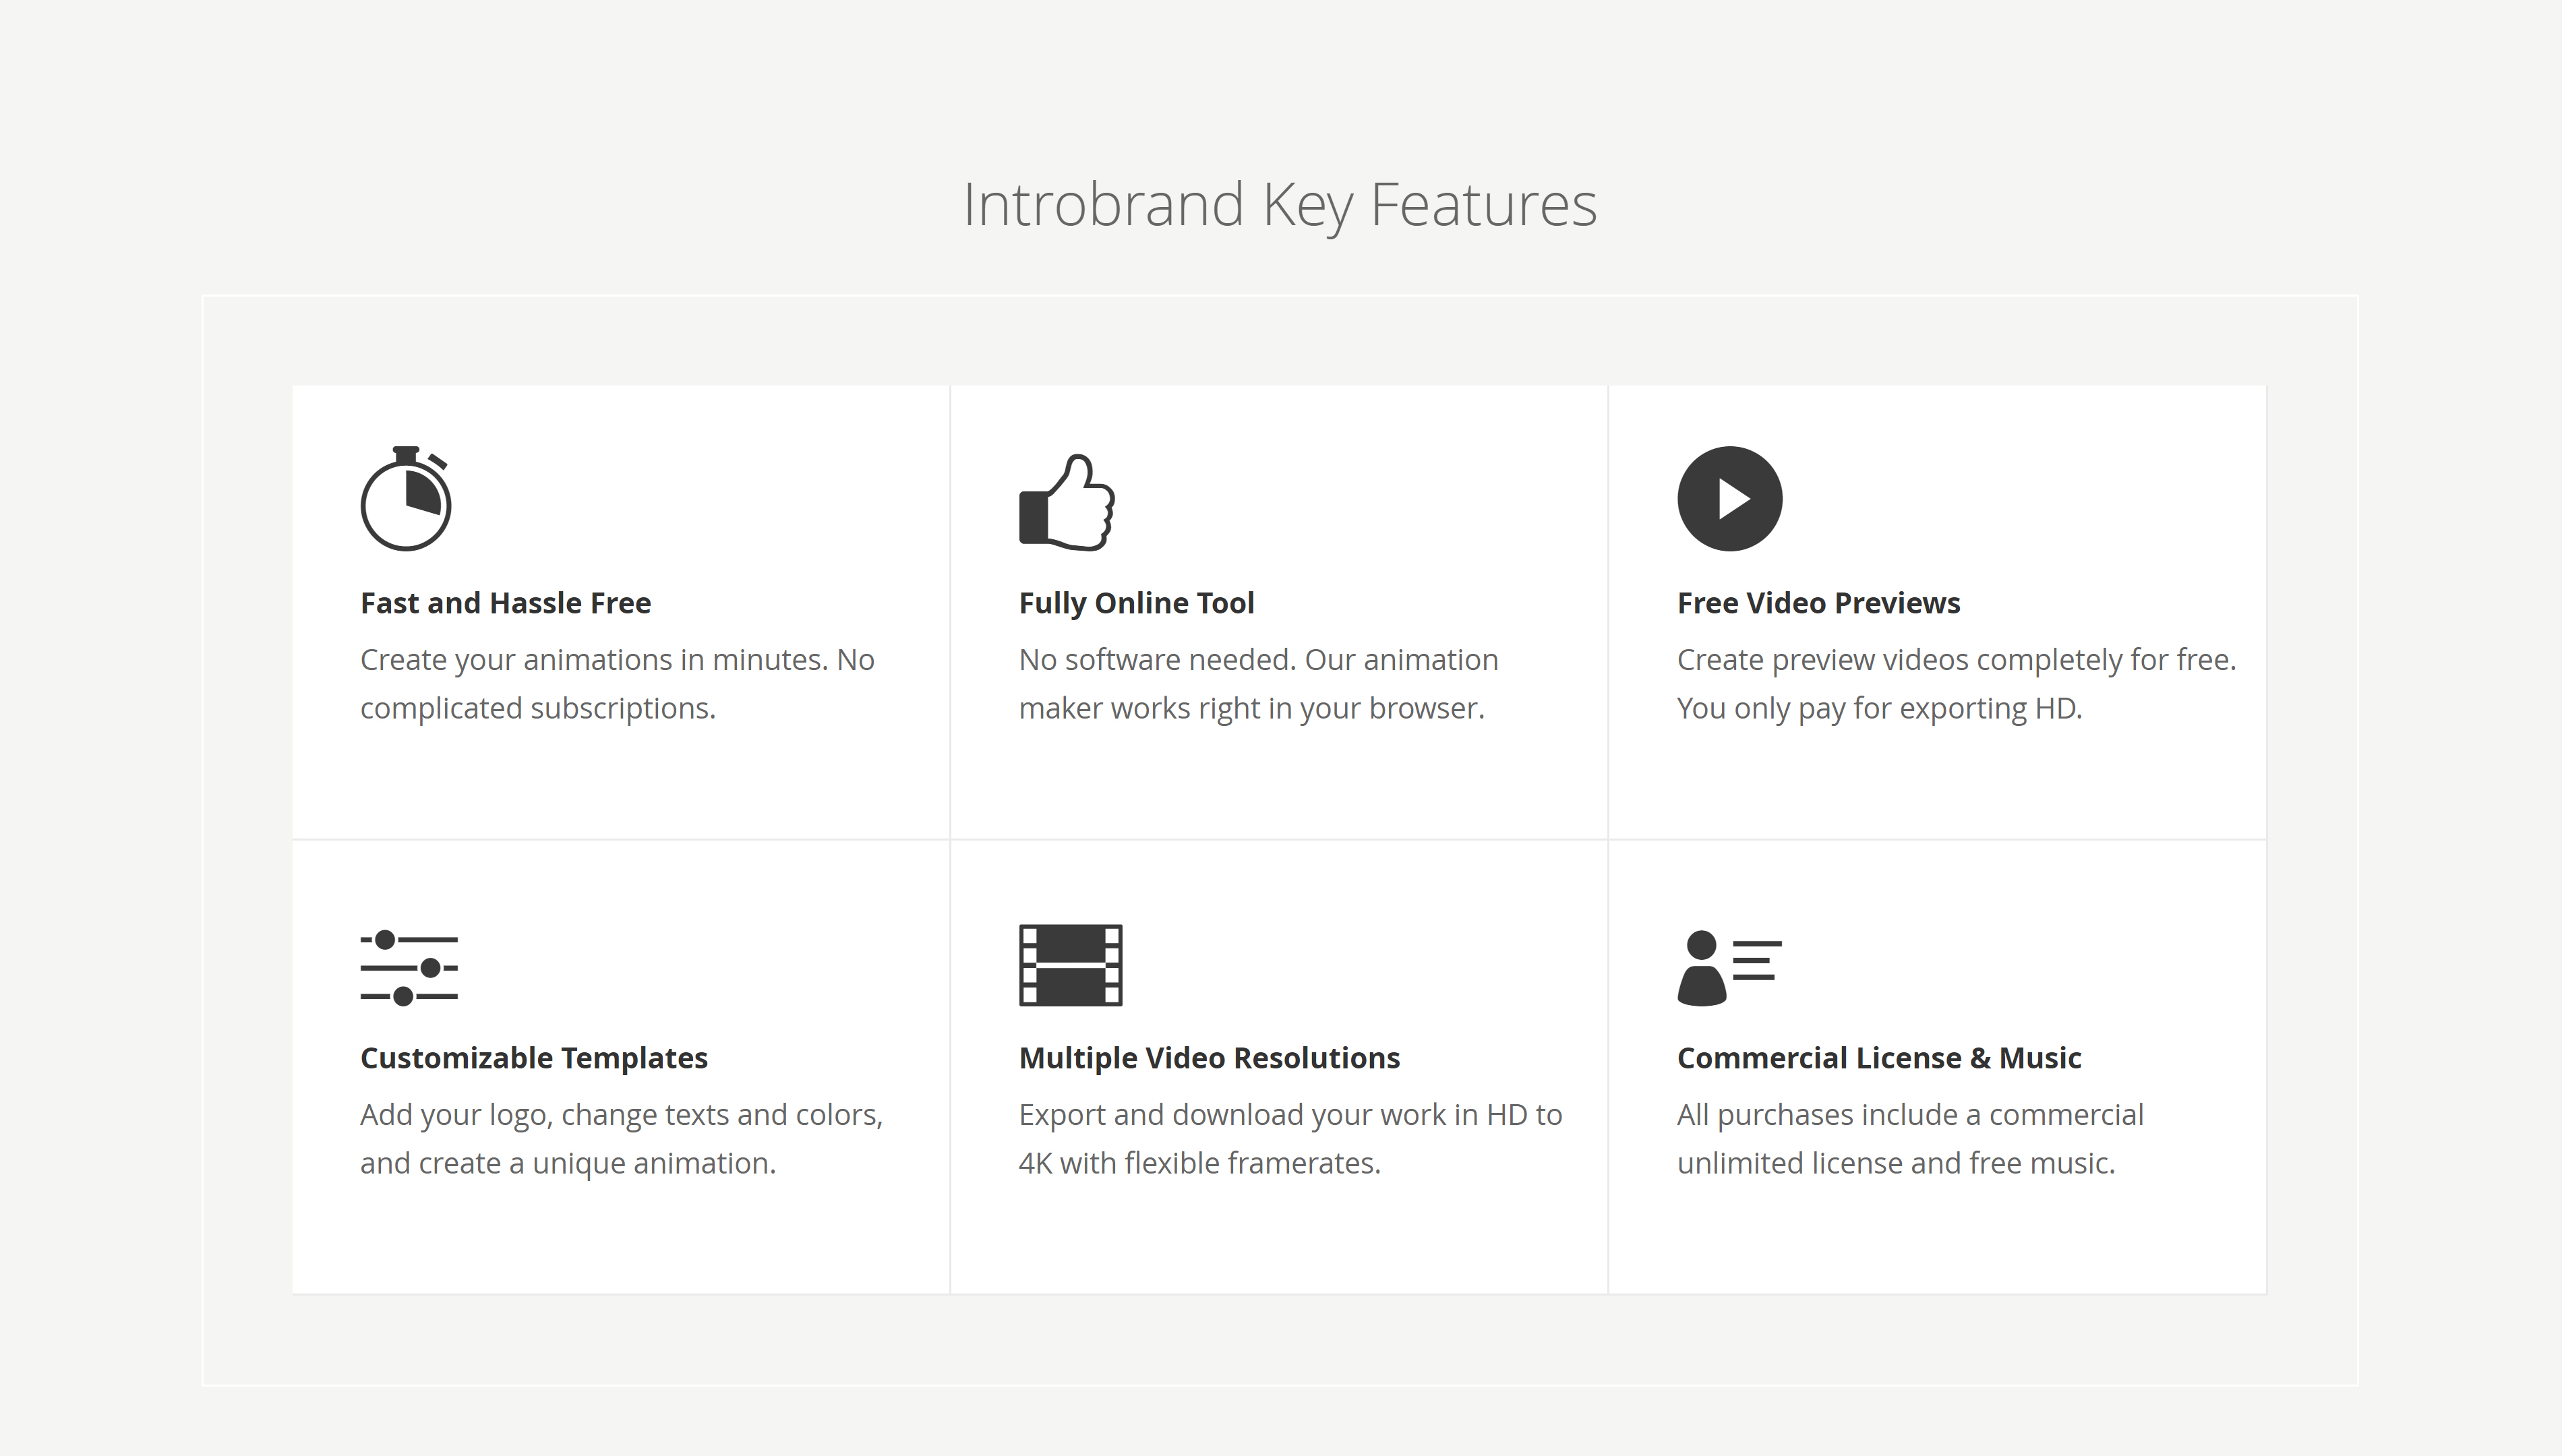 Introbrand Key Features Page